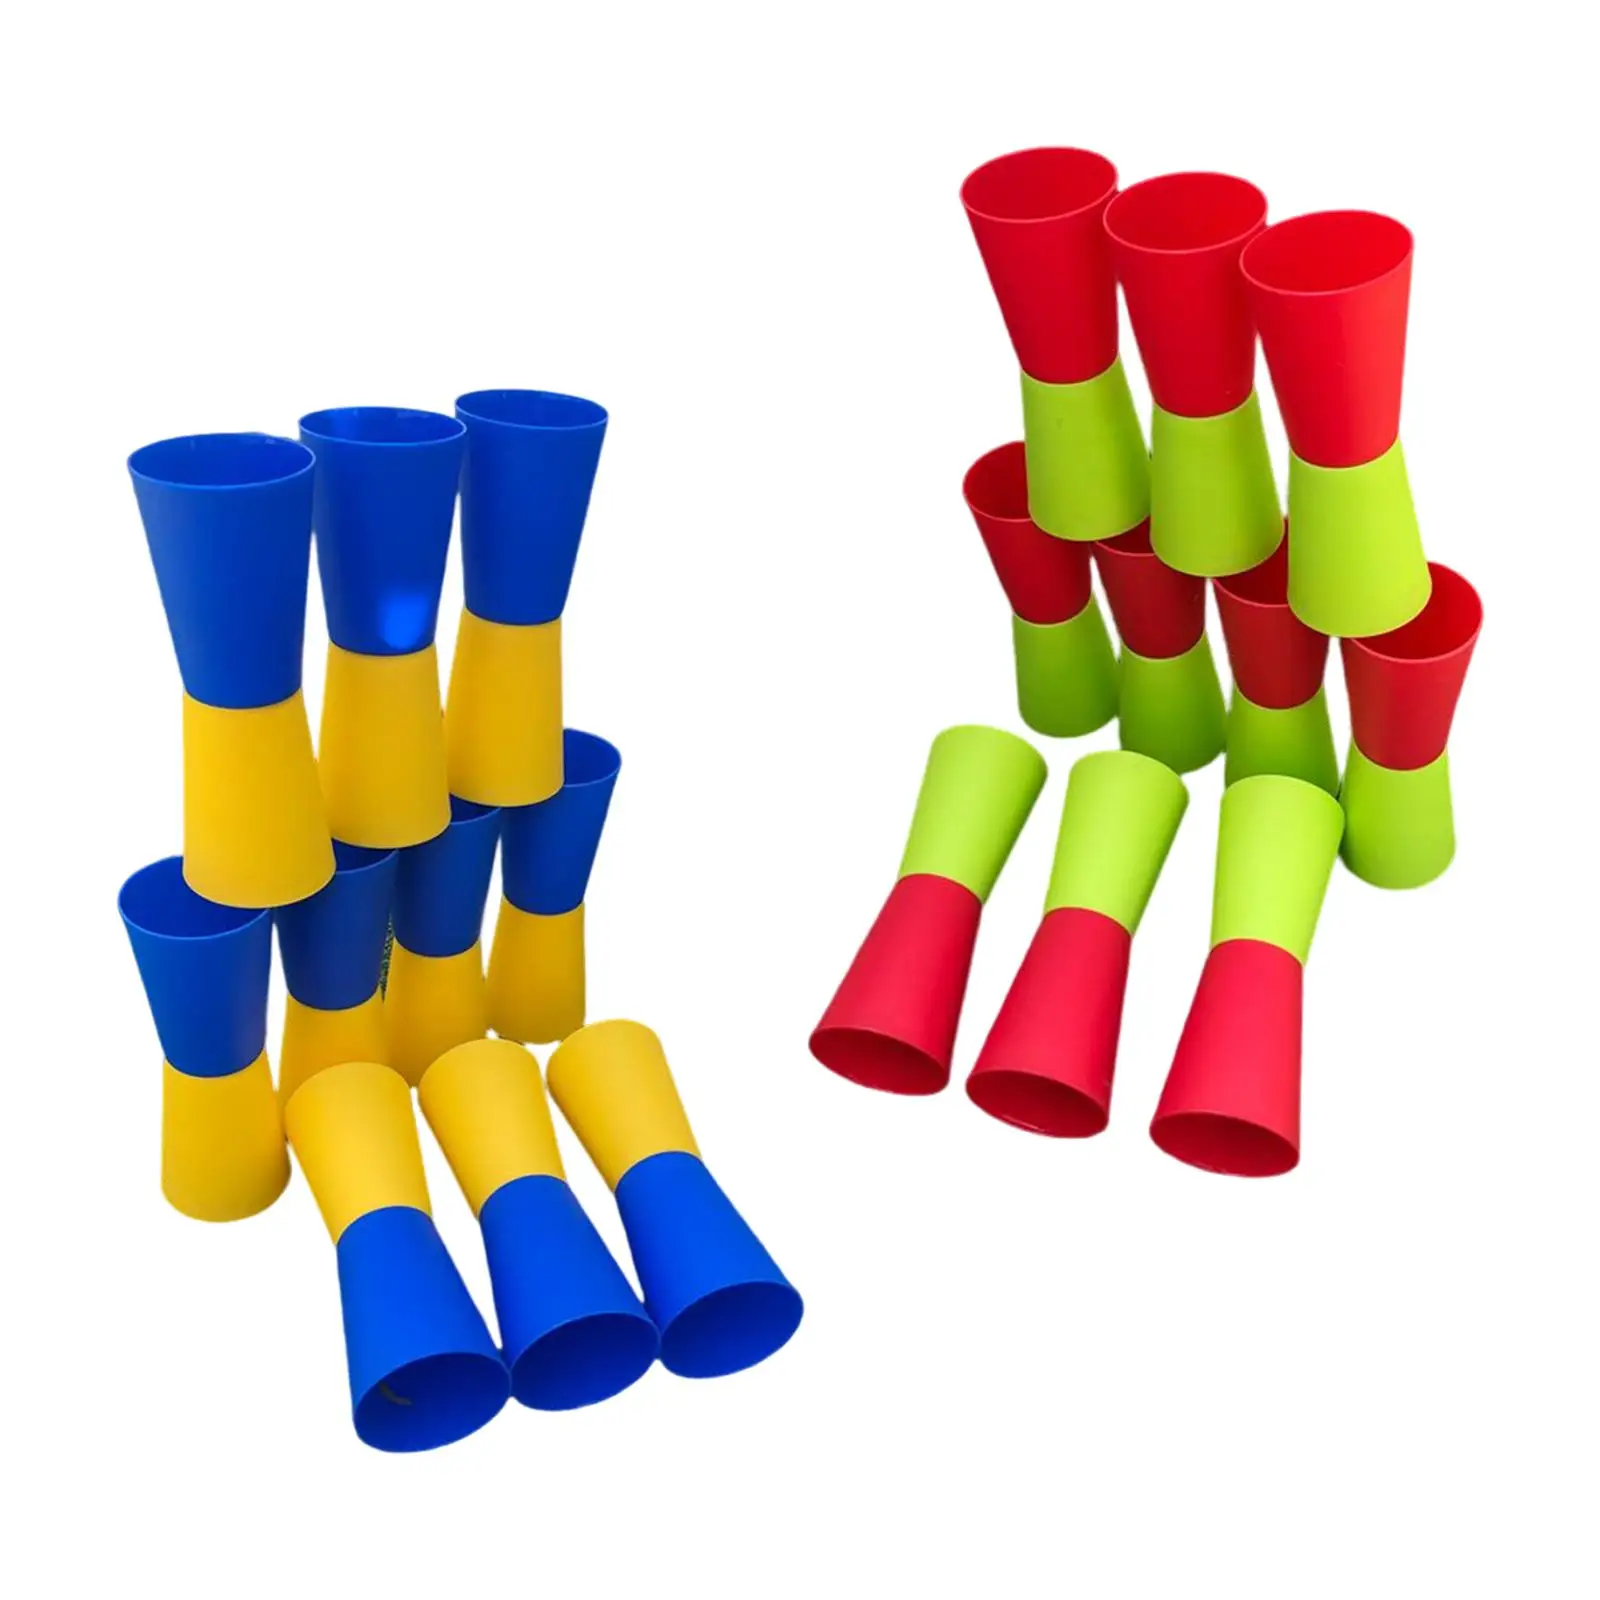 10x Flip Cups Agility Training Exercise Shuttle Run Physical Fitness for Gym